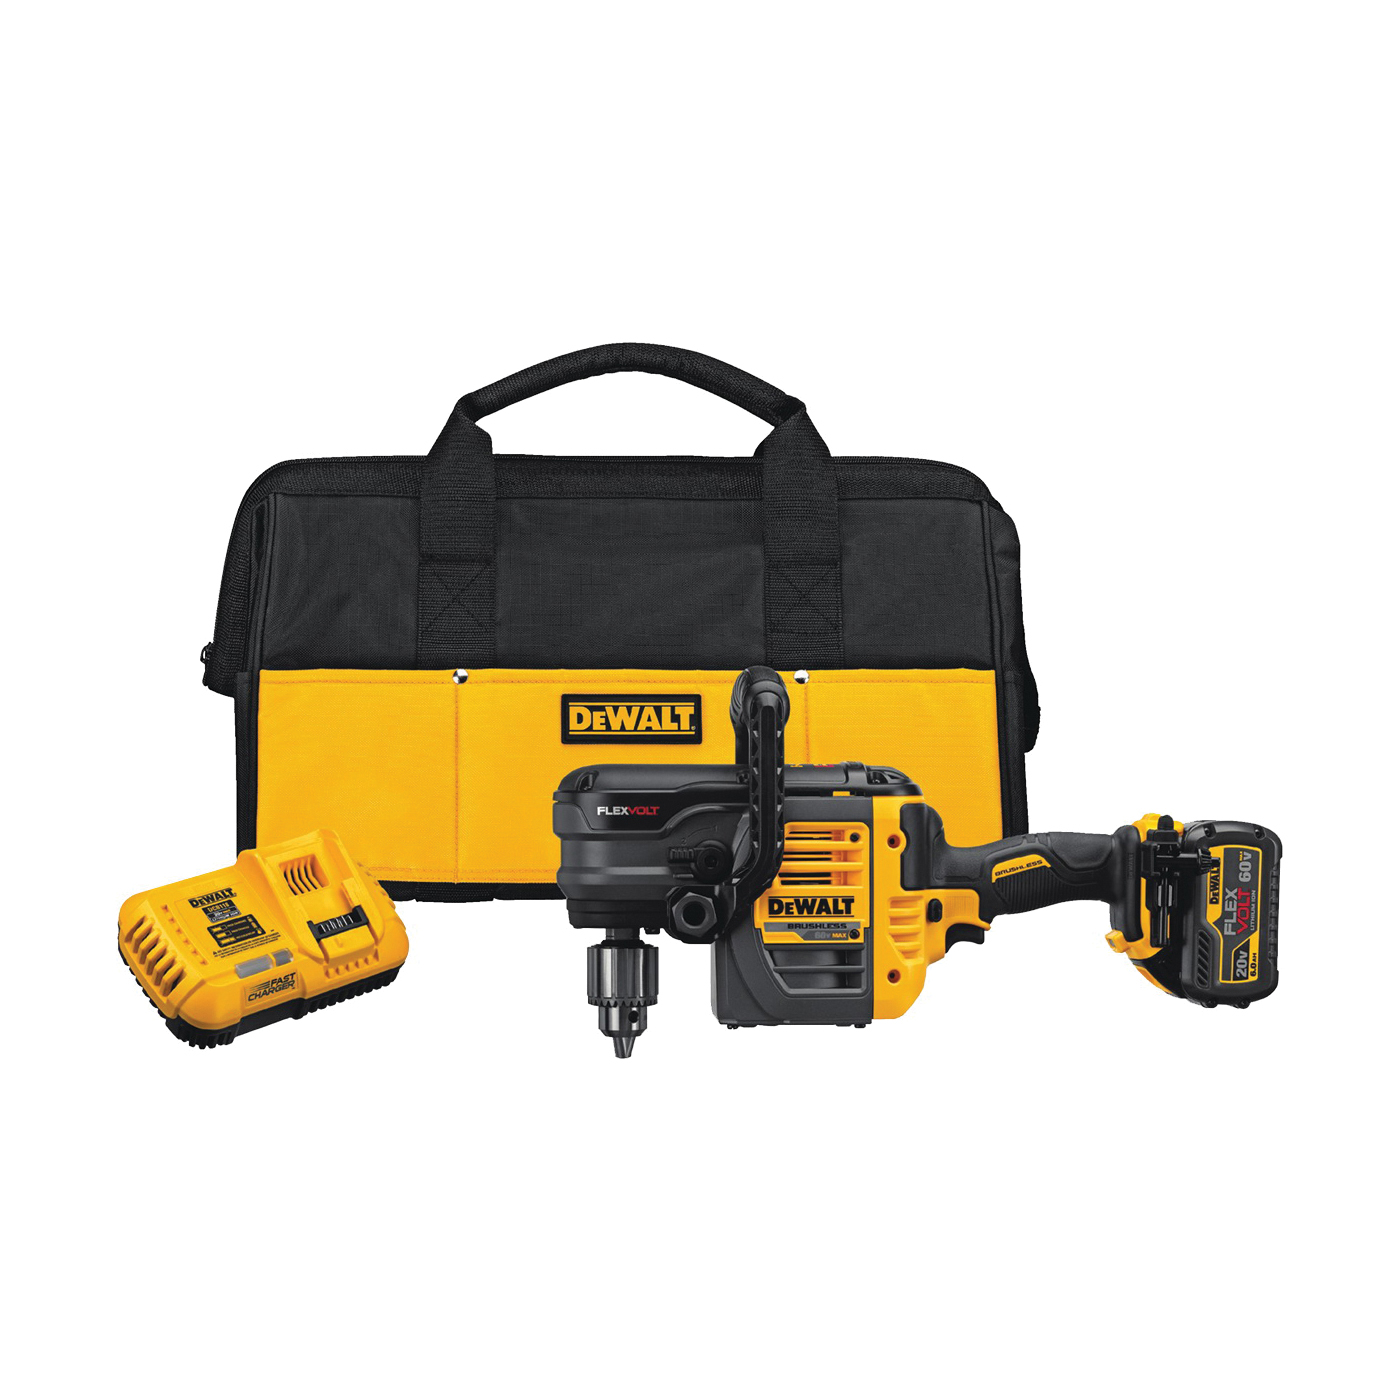 DCD460T1 Stud and Joist Drill Kit, Battery Included, 60 V, 1/2 in Chuck, Keyed Chuck